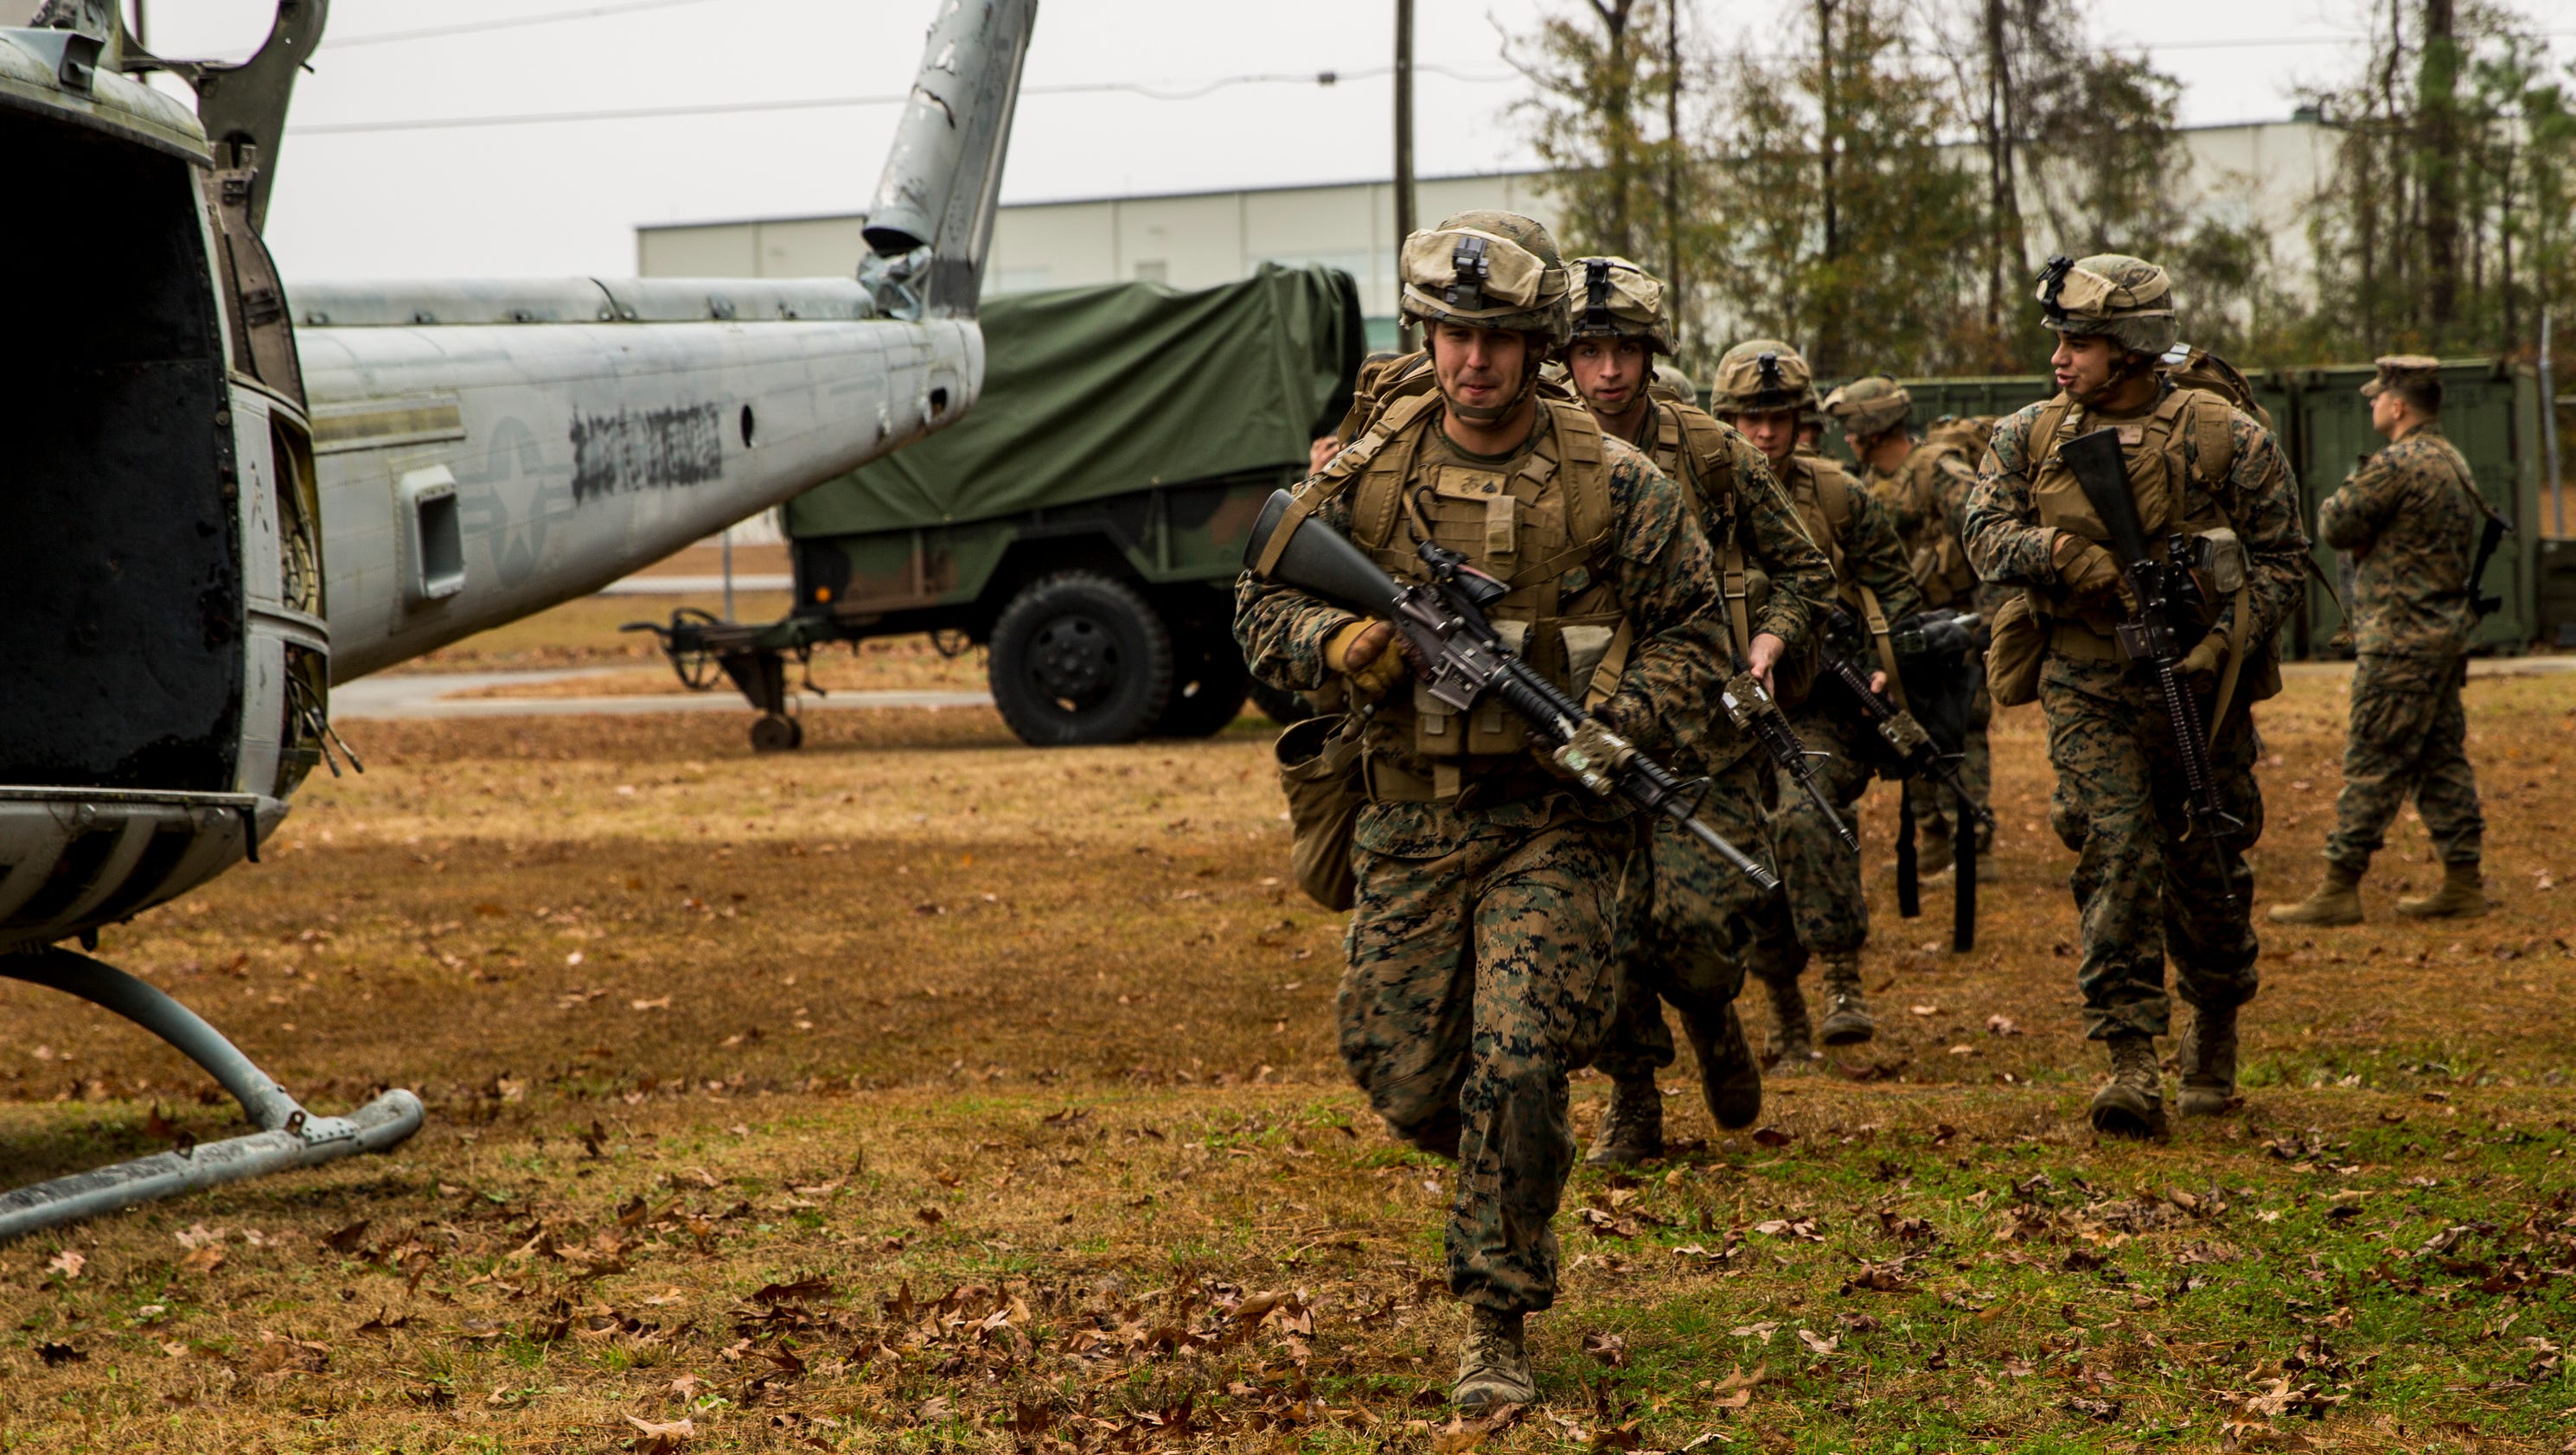 Marines deploy to Africa for crisis response mission